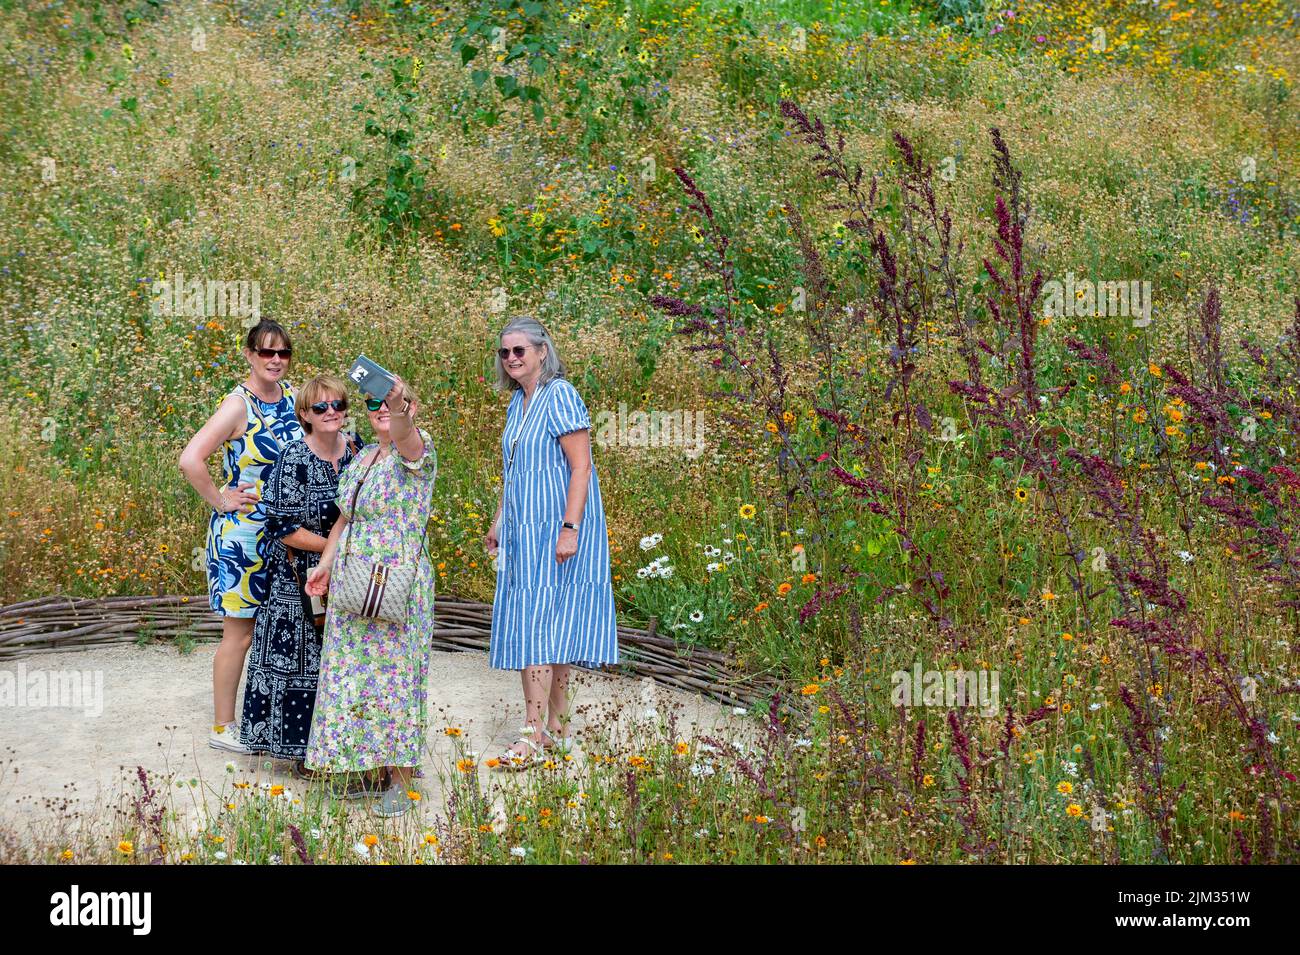 London, UK.  4 August 2022.  UK Weather - Visitors take a selfie at Superbloom, a display of wildflowers in the moat of the Tower of London, grown from over 20 million seeds from 29 flower species which were sown to celebrate the Queen’s Platinum Jubilee. The flowers were chosen to attract a variety of pollinators to create a new biodiverse habitat.  As the current unusually dry conditions continue, with drought warnings in certain places, a modest sprinkler system is just managing to keep the flowers in bloom.  Credit: Stephen Chung / Alamy Live News Stock Photo